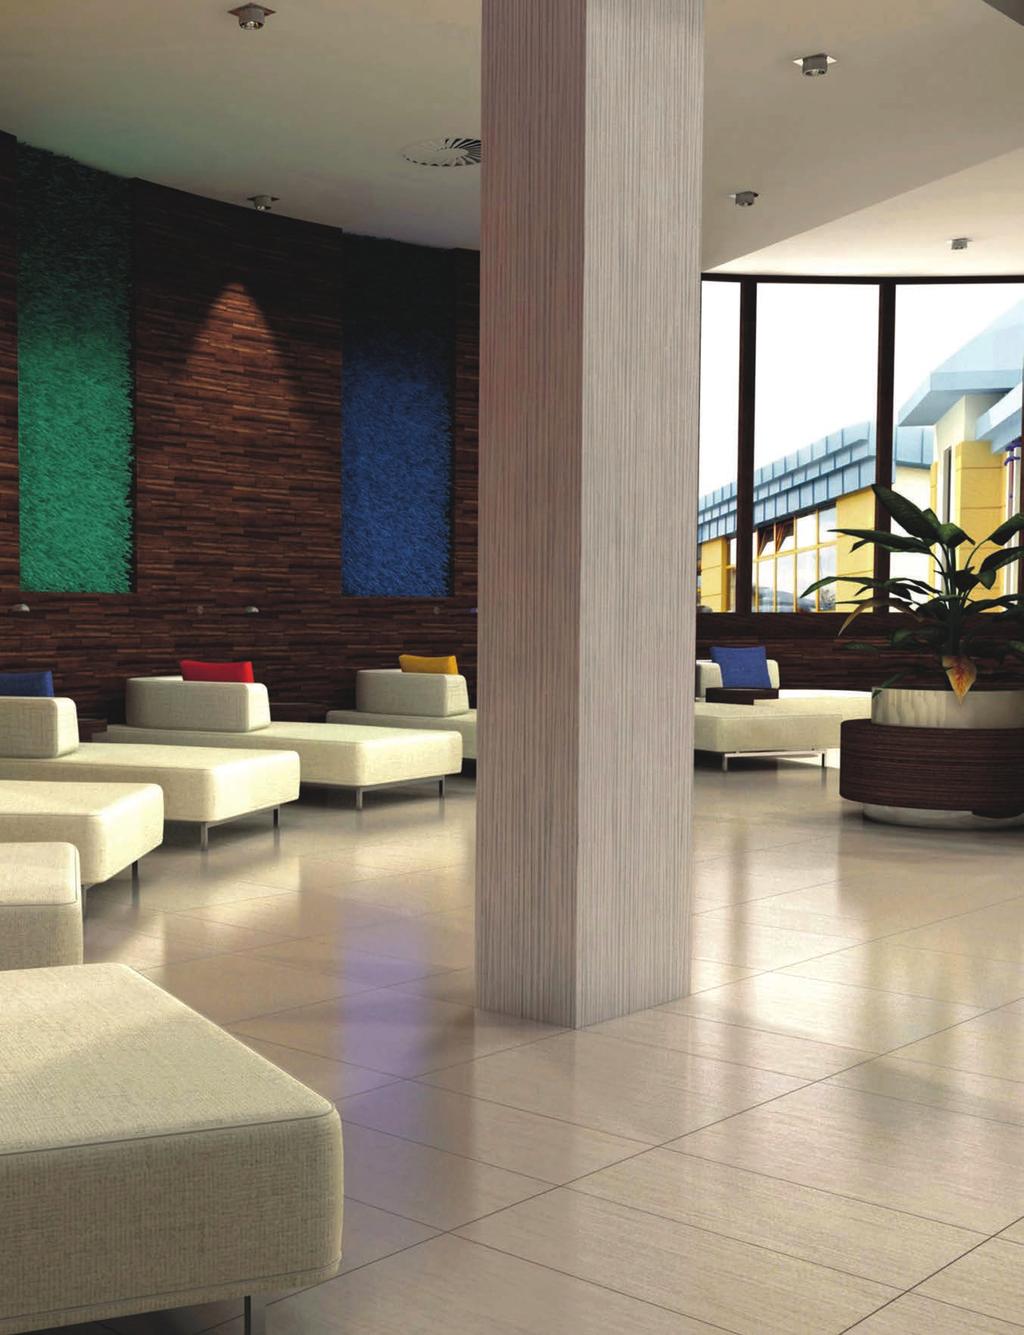 Park Inn by Radisson makes sure business travelers have what they need to be productive, and leisure guests are able to make the most of their pleasure.